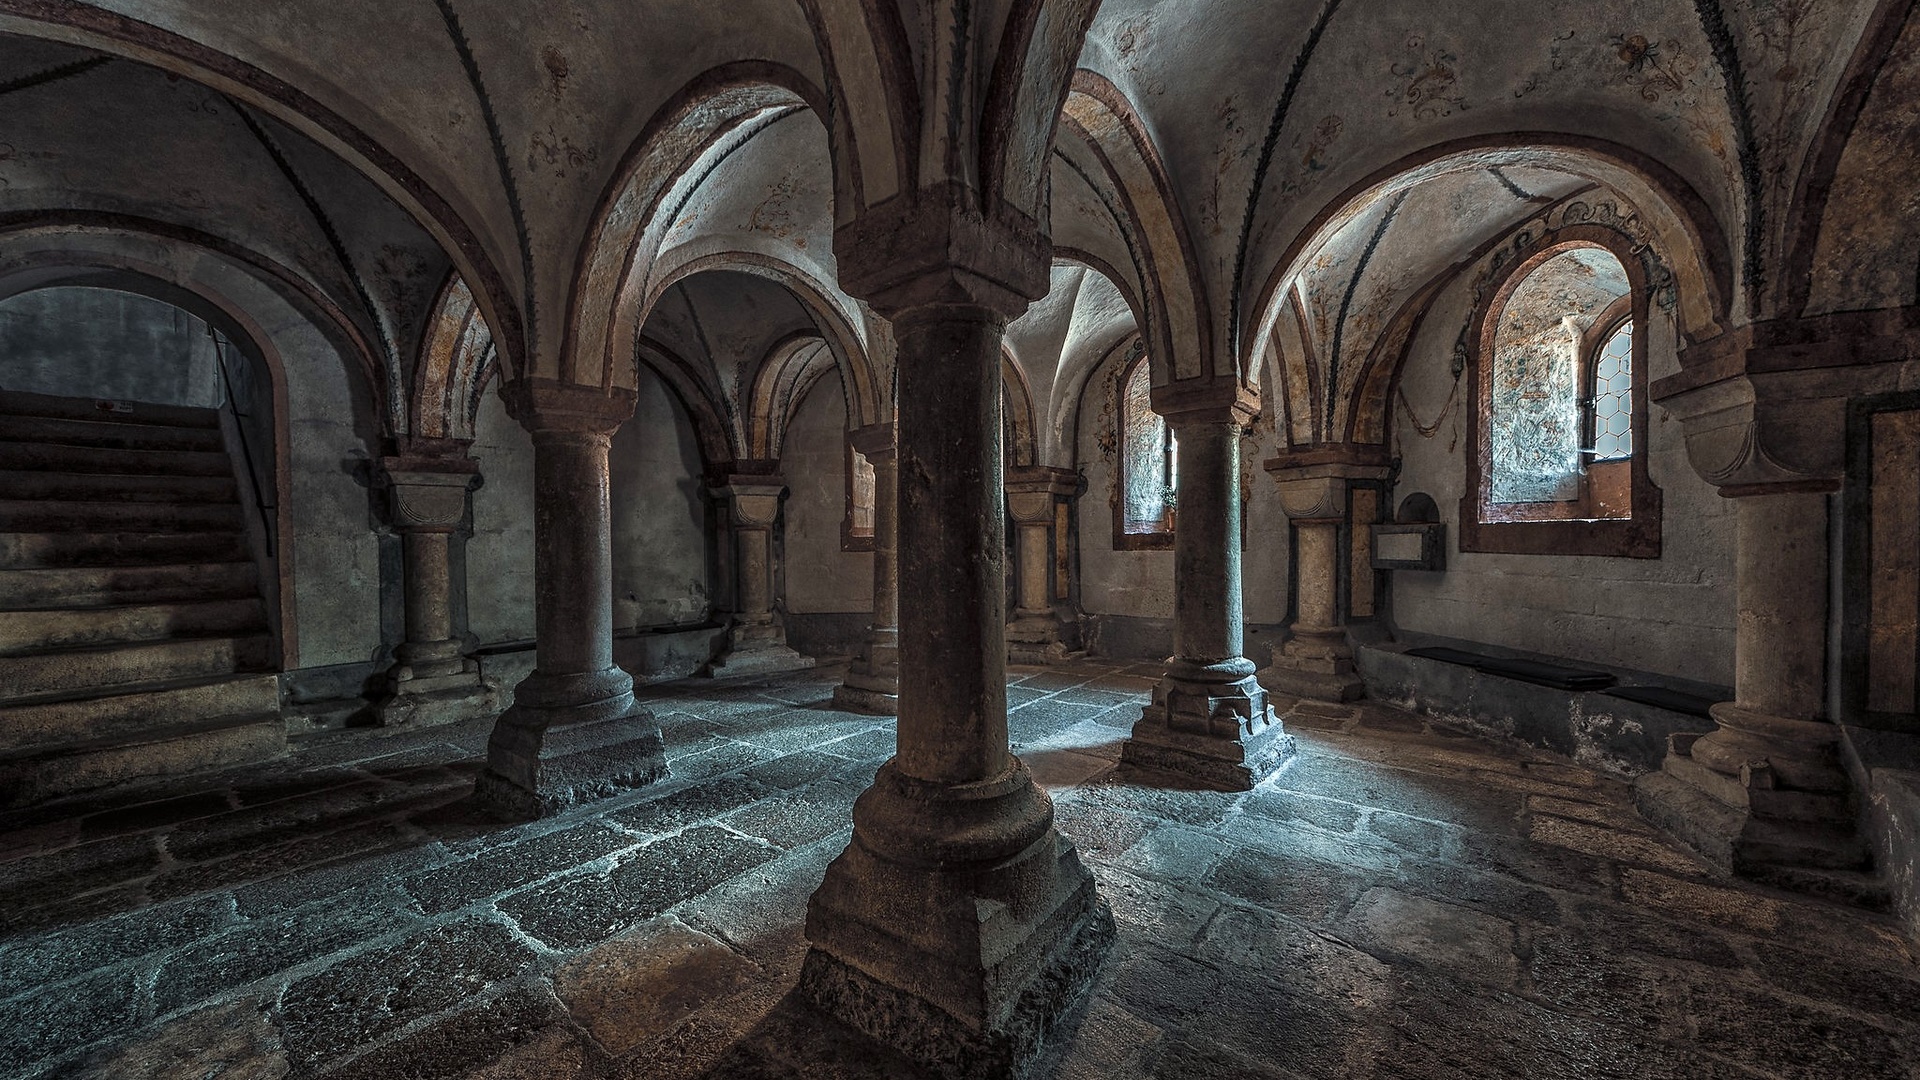 Architecture Building Arch Interior Stairs Medieval Gothic Column Stones 1920x1080